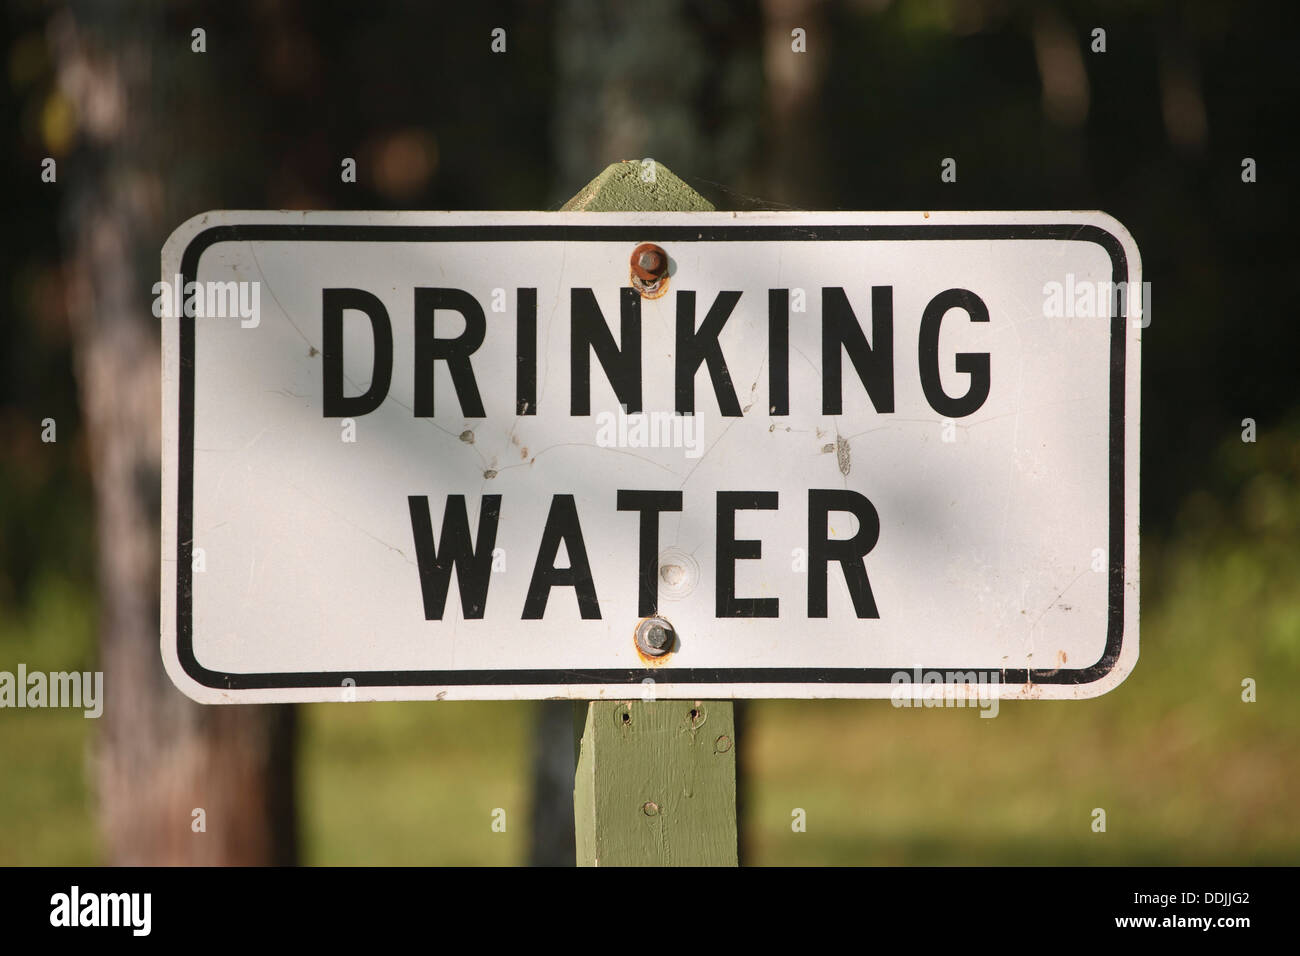 Drinking water sign and tap in rural park Stock Photo